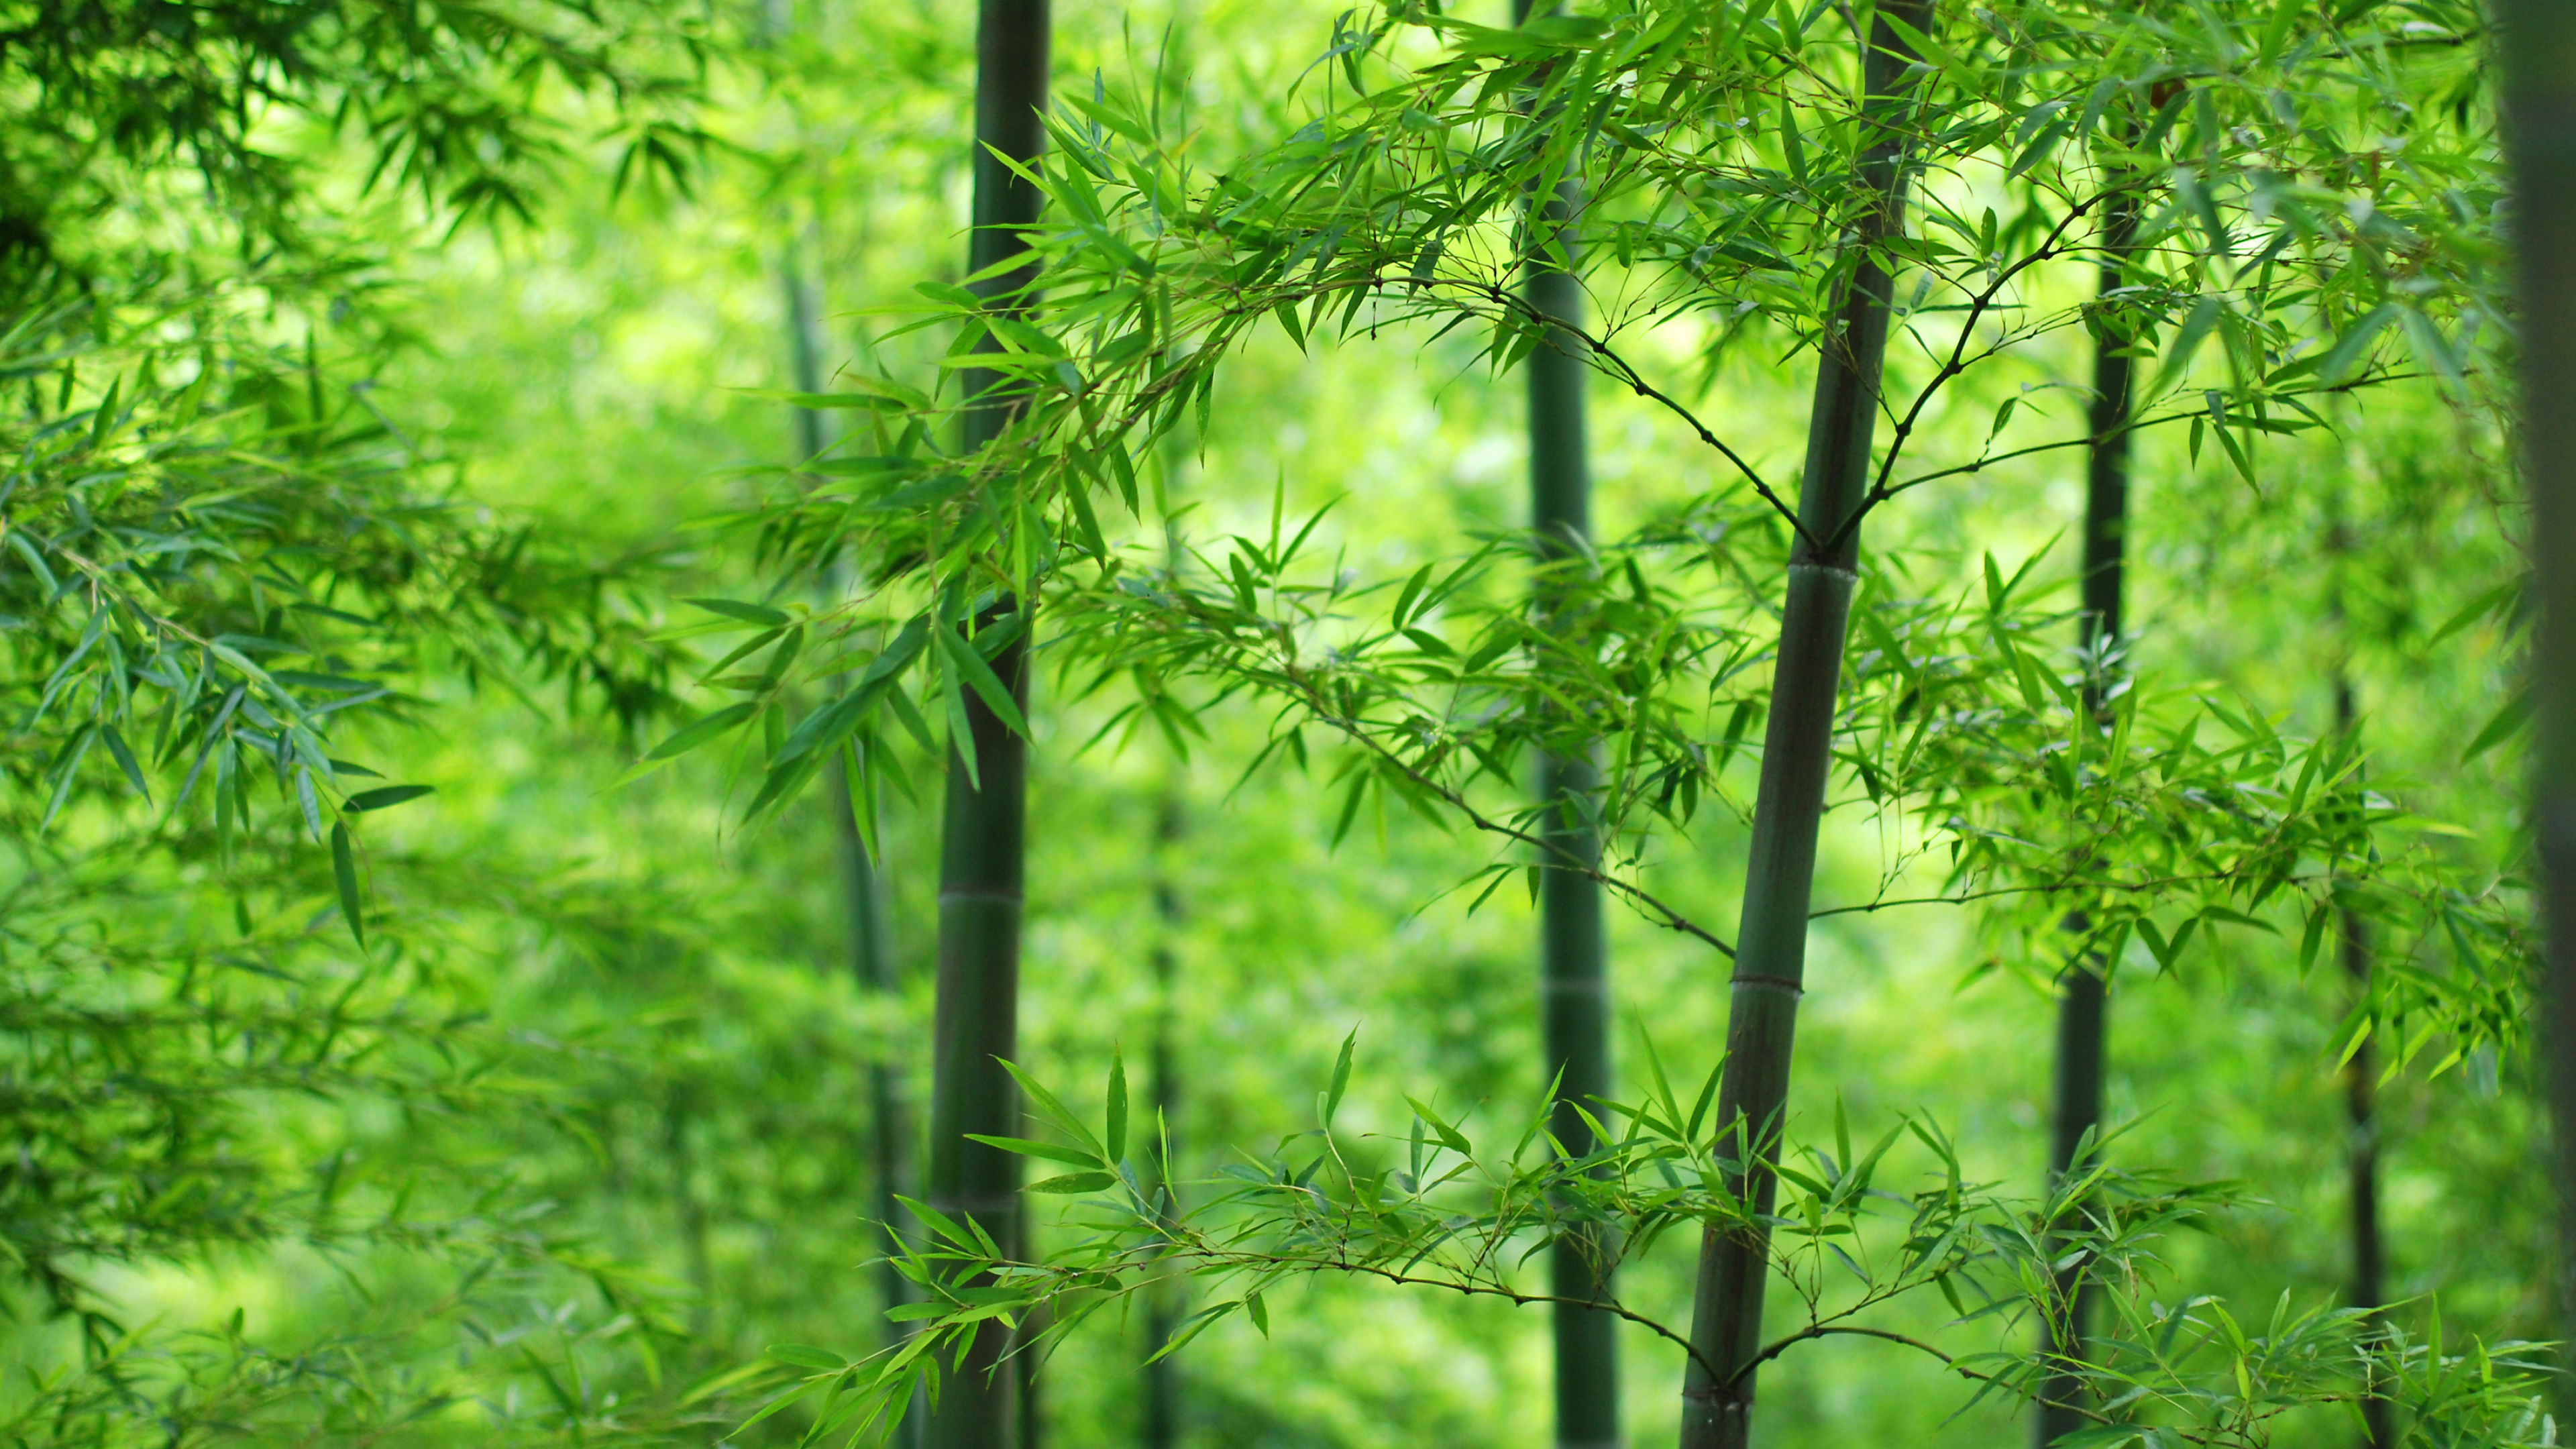 Bamboo: A natural composite material with a high strength-to-weight ratio useful for structures. 3840x2160 4K Wallpaper.